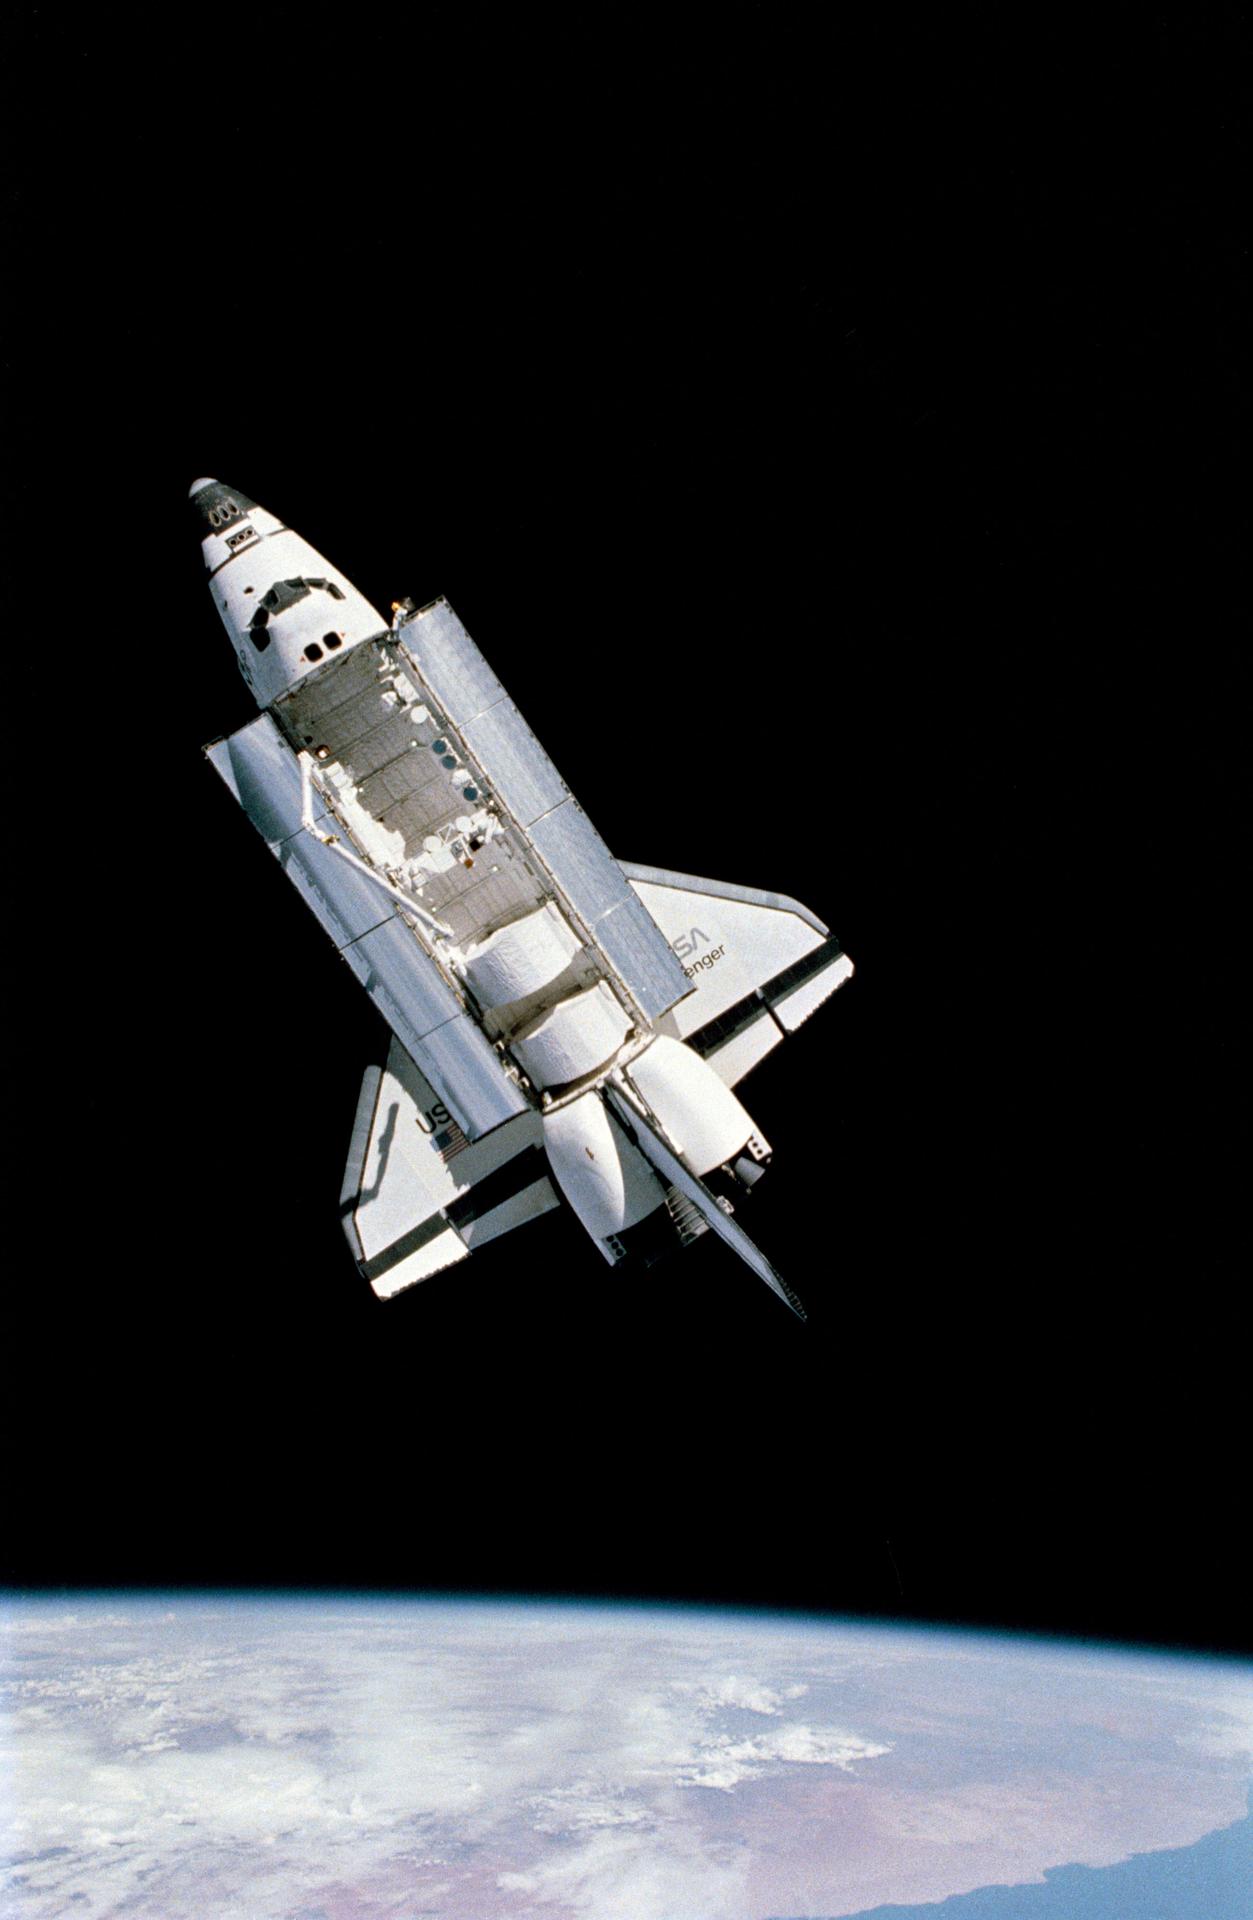 Image of Challenger space shuttle in space with Earth seen below.